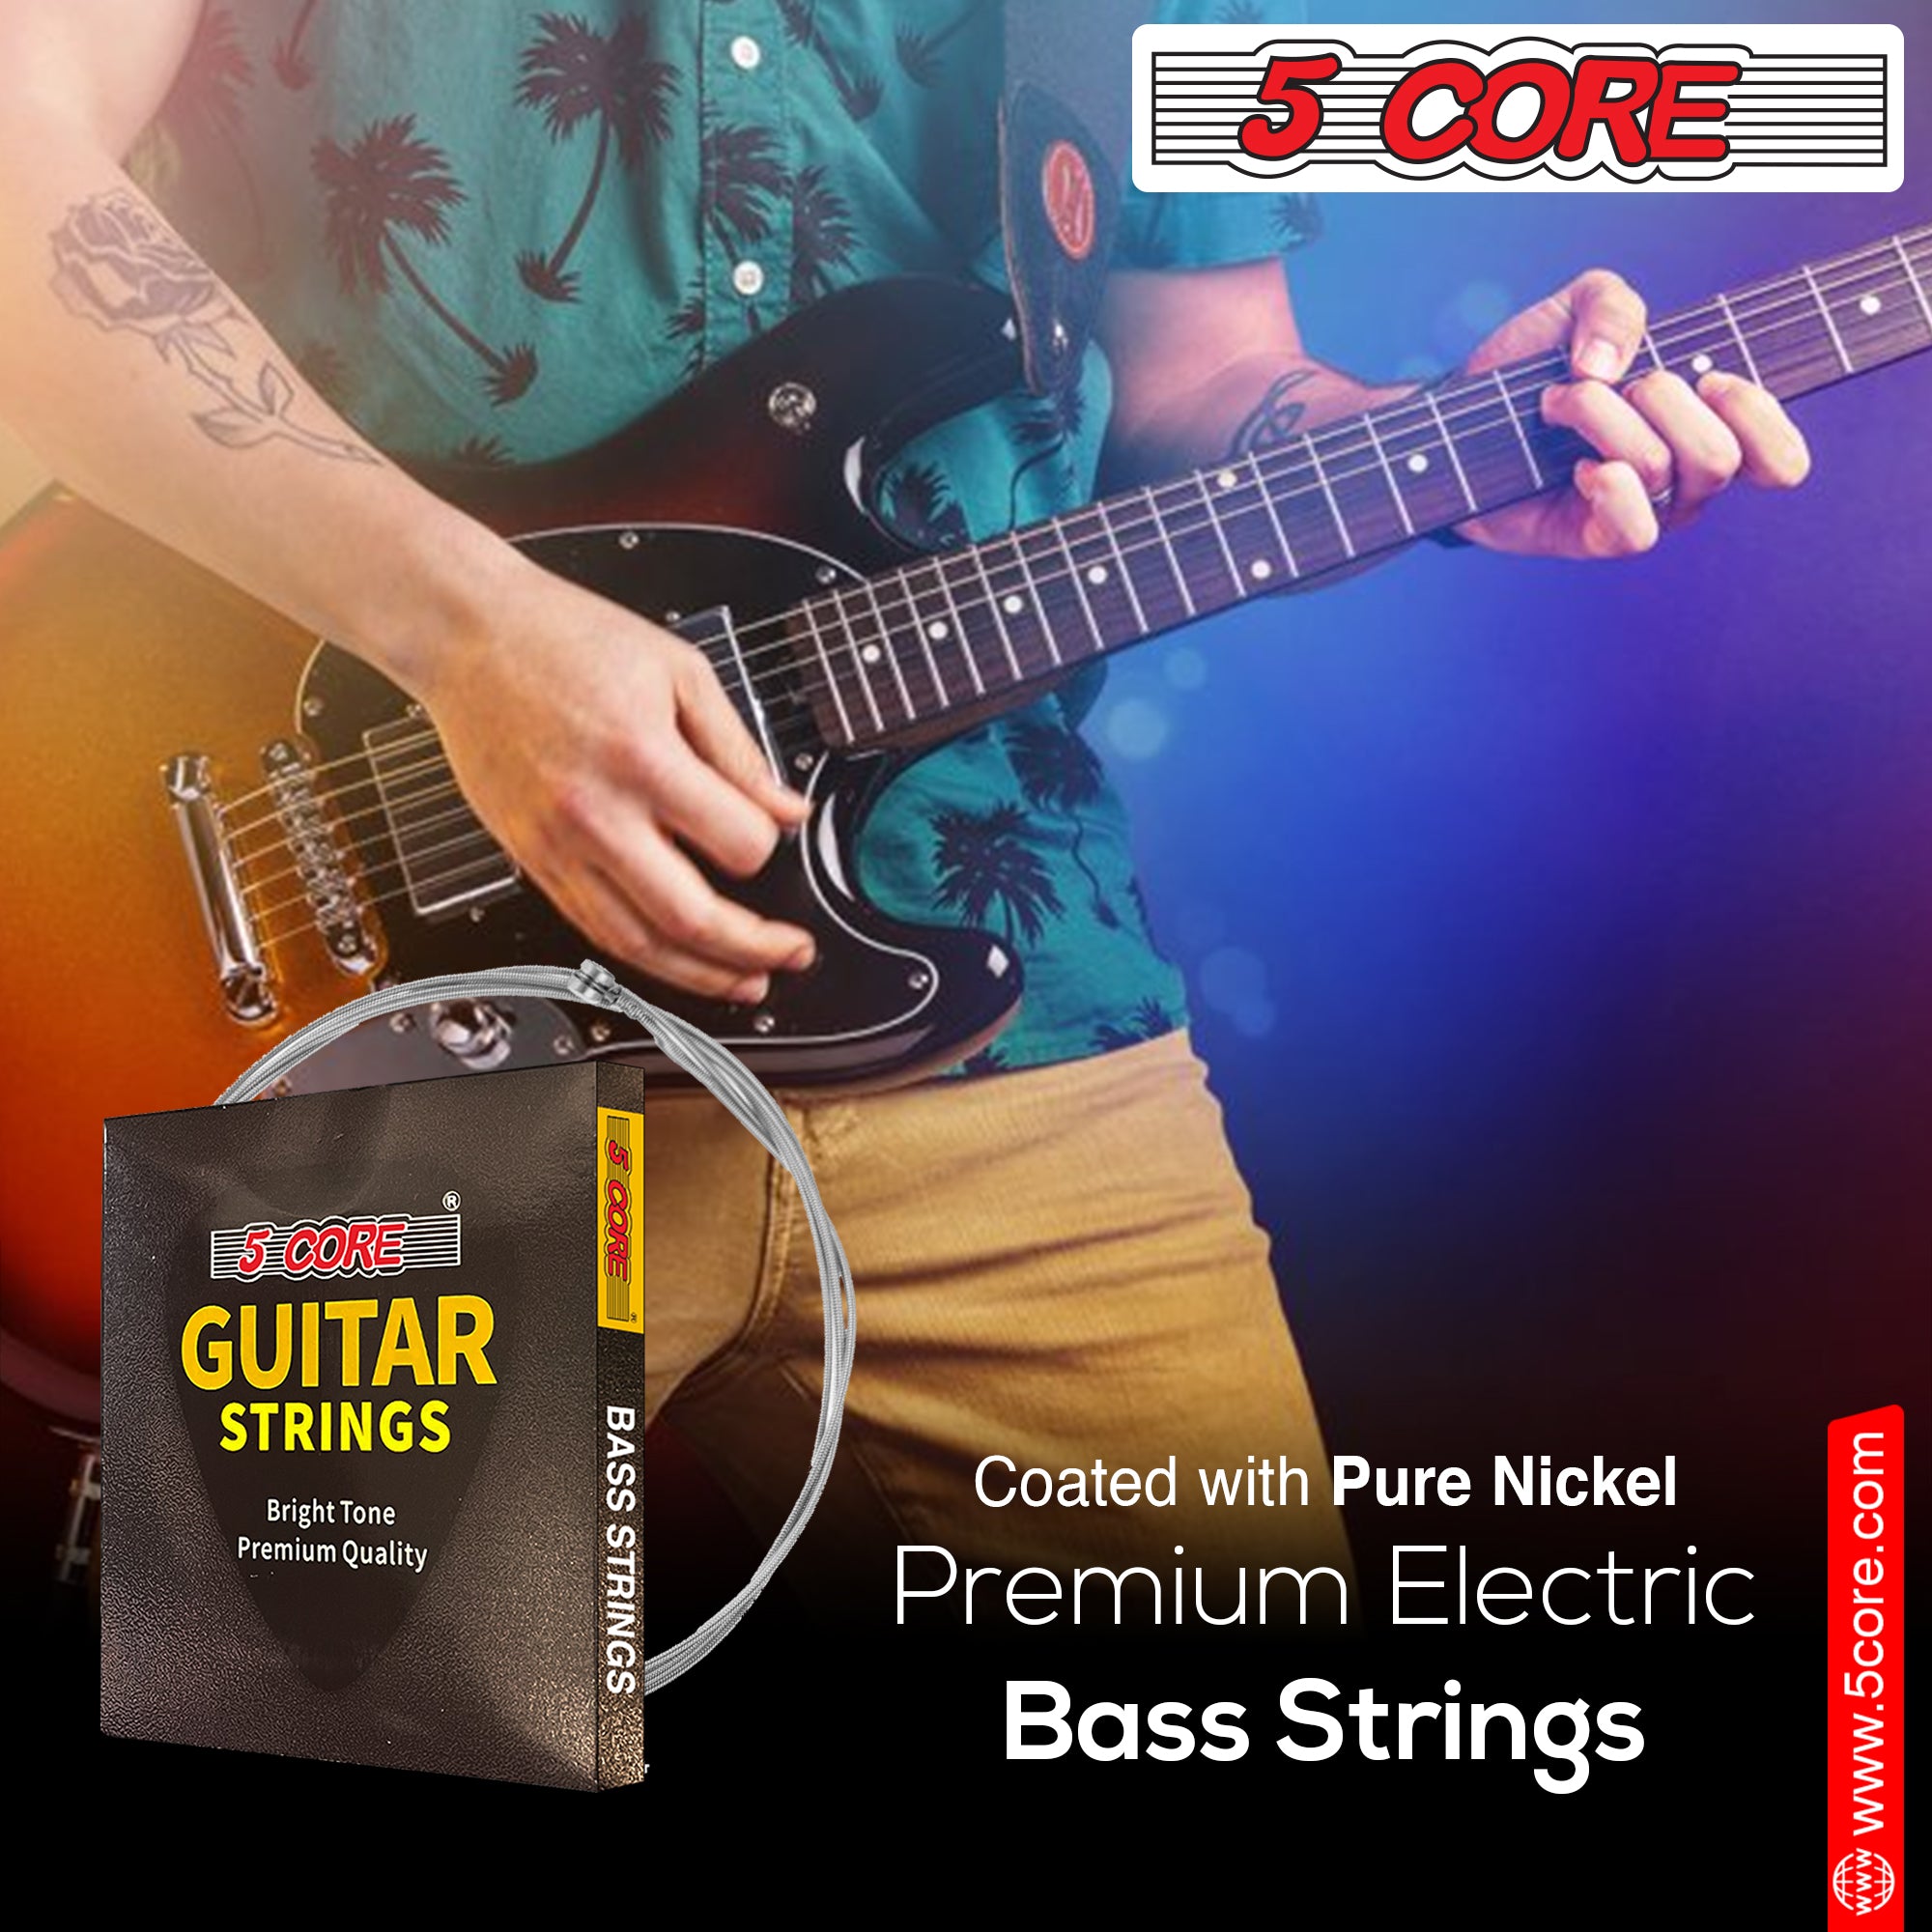 5 Core Bass Guitar Strings • 0.010-.048 Gauge • w Deep Bright Tone for 6 String Electric Guitars